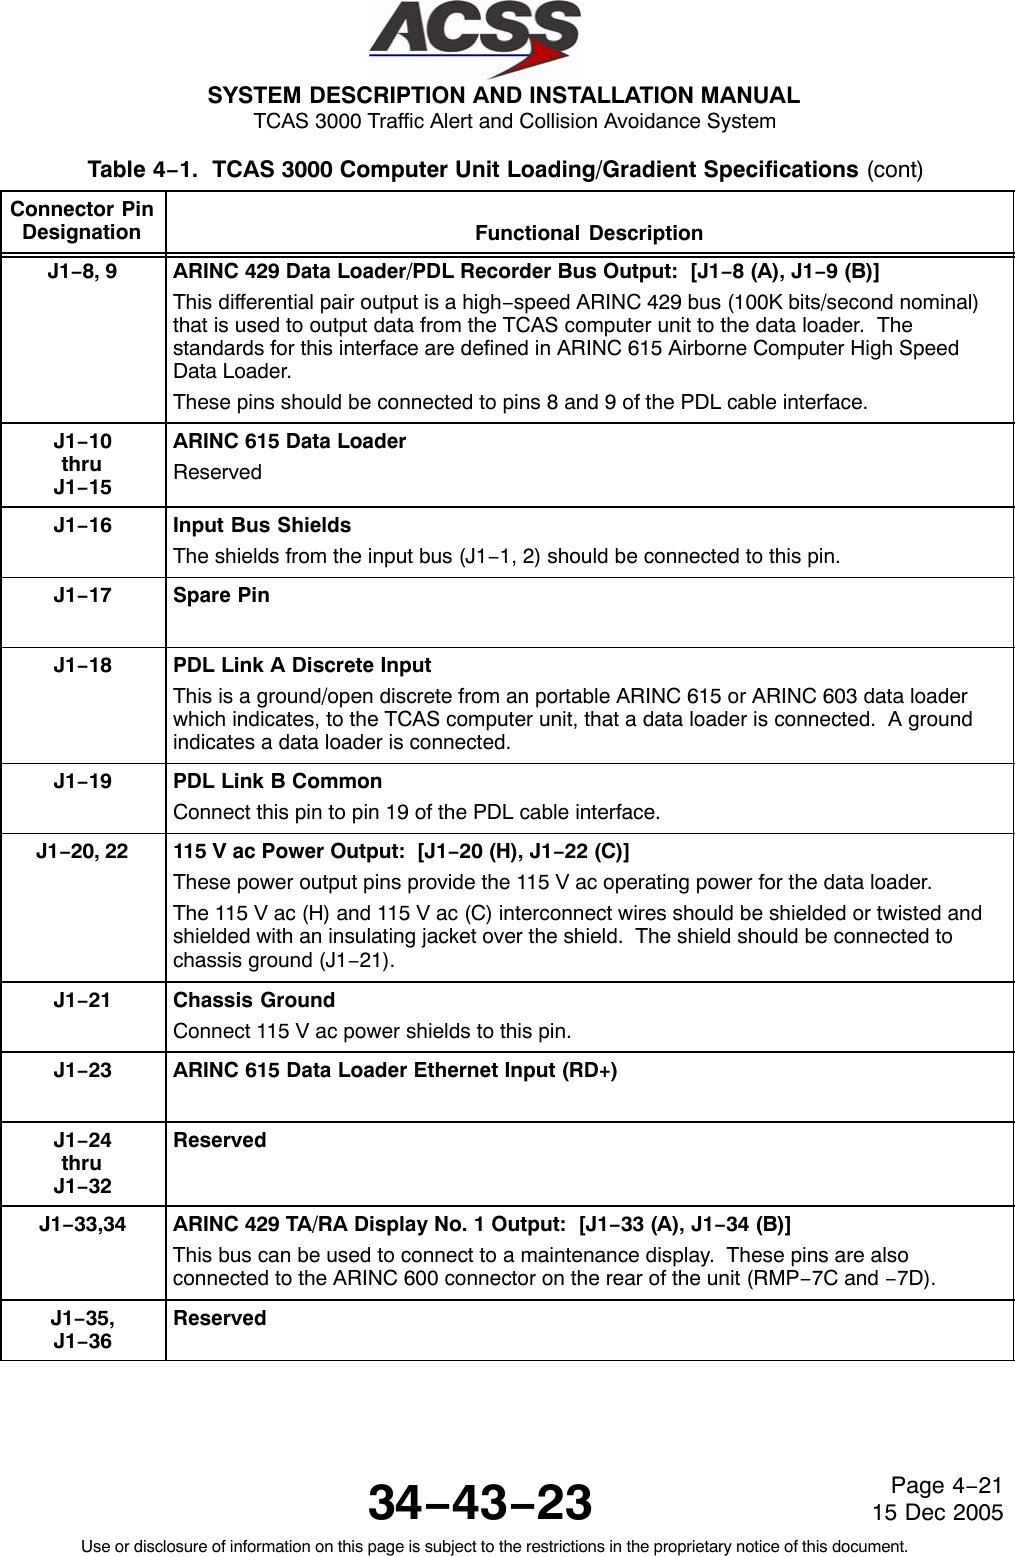 SYSTEM DESCRIPTION AND INSTALLATION MANUAL TCAS 3000 Traffic Alert and Collision Avoidance System34−43−23Use or disclosure of information on this page is subject to the restrictions in the proprietary notice of this document.Page 4−2115 Dec 2005Table 4−1.  TCAS 3000 Computer Unit Loading/Gradient Specifications (cont)Connector PinDesignation Functional DescriptionJ1−8, 9 ARINC 429 Data Loader/PDL Recorder Bus Output:  [J1−8 (A), J1−9 (B)]This differential pair output is a high−speed ARINC 429 bus (100K bits/second nominal)that is used to output data from the TCAS computer unit to the data loader.  Thestandards for this interface are defined in ARINC 615 Airborne Computer High SpeedData Loader.These pins should be connected to pins 8 and 9 of the PDL cable interface.J1−10thruJ1−15ARINC 615 Data LoaderReservedJ1−16 Input Bus ShieldsThe shields from the input bus (J1−1, 2) should be connected to this pin.J1−17 Spare PinJ1−18 PDL Link A Discrete InputThis is a ground/open discrete from an portable ARINC 615 or ARINC 603 data loaderwhich indicates, to the TCAS computer unit, that a data loader is connected.  A groundindicates a data loader is connected.J1−19 PDL Link B CommonConnect this pin to pin 19 of the PDL cable interface.J1−20, 22 115 V ac Power Output:  [J1−20 (H), J1−22 (C)]These power output pins provide the 115 V ac operating power for the data loader.The 115 V ac (H) and 115 V ac (C) interconnect wires should be shielded or twisted andshielded with an insulating jacket over the shield.  The shield should be connected tochassis ground (J1−21).J1−21 Chassis GroundConnect 115 V ac power shields to this pin.J1−23 ARINC 615 Data Loader Ethernet Input (RD+)J1−24thruJ1−32ReservedJ1−33,34 ARINC 429 TA/RA Display No. 1 Output:  [J1−33 (A), J1−34 (B)]This bus can be used to connect to a maintenance display.  These pins are alsoconnected to the ARINC 600 connector on the rear of the unit (RMP−7C and −7D).J1−35,J1−36Reserved